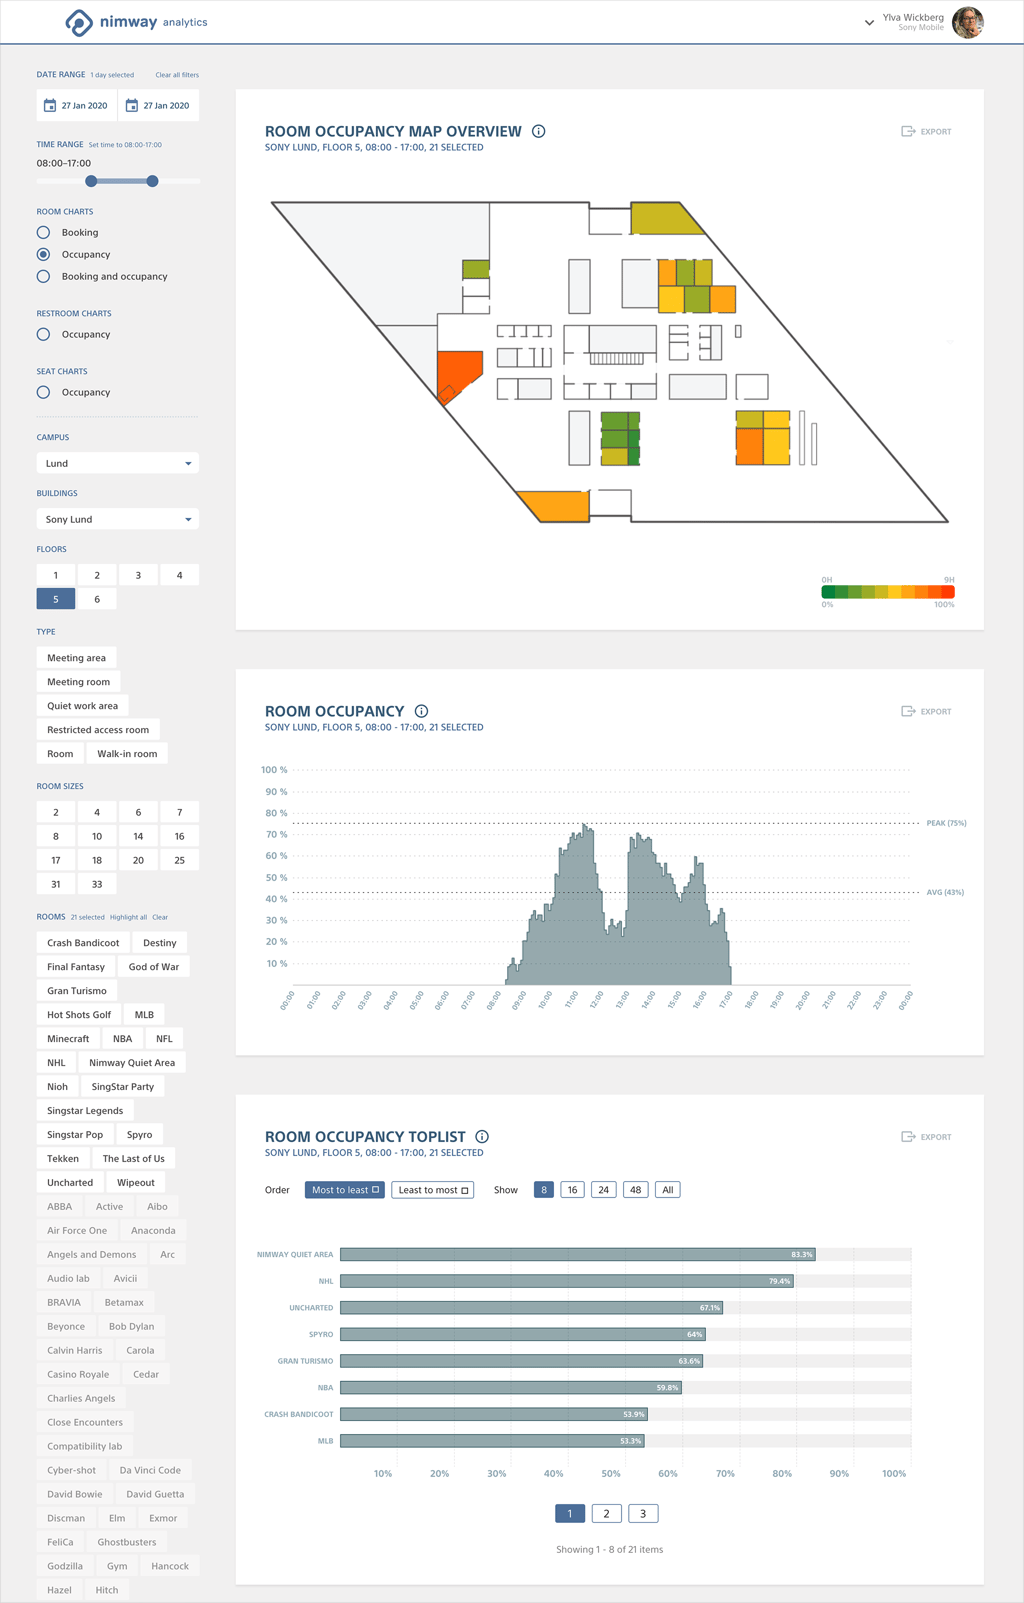 The Nimway analytics interface showing room occupancy for a certain date range